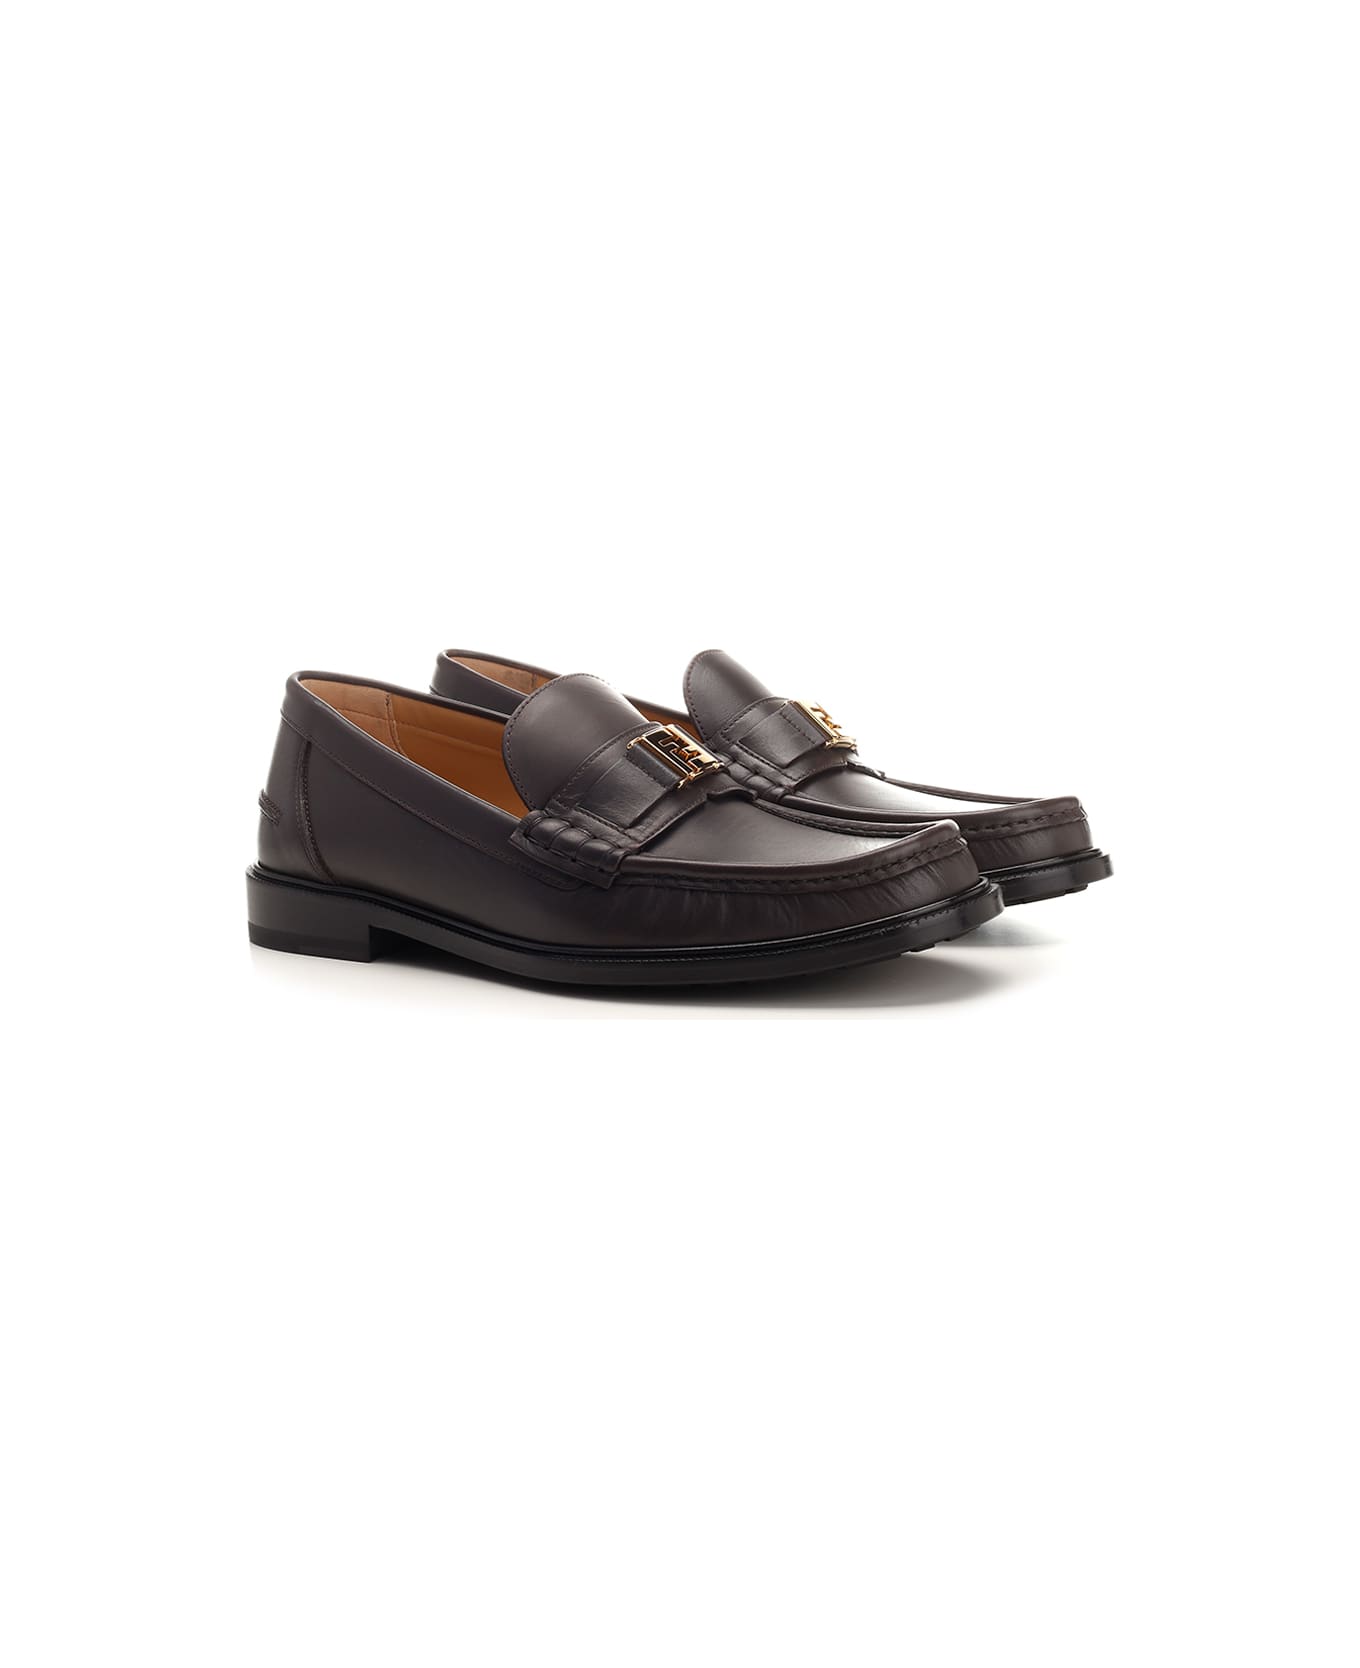 Fendi Leather Loafers - Brown